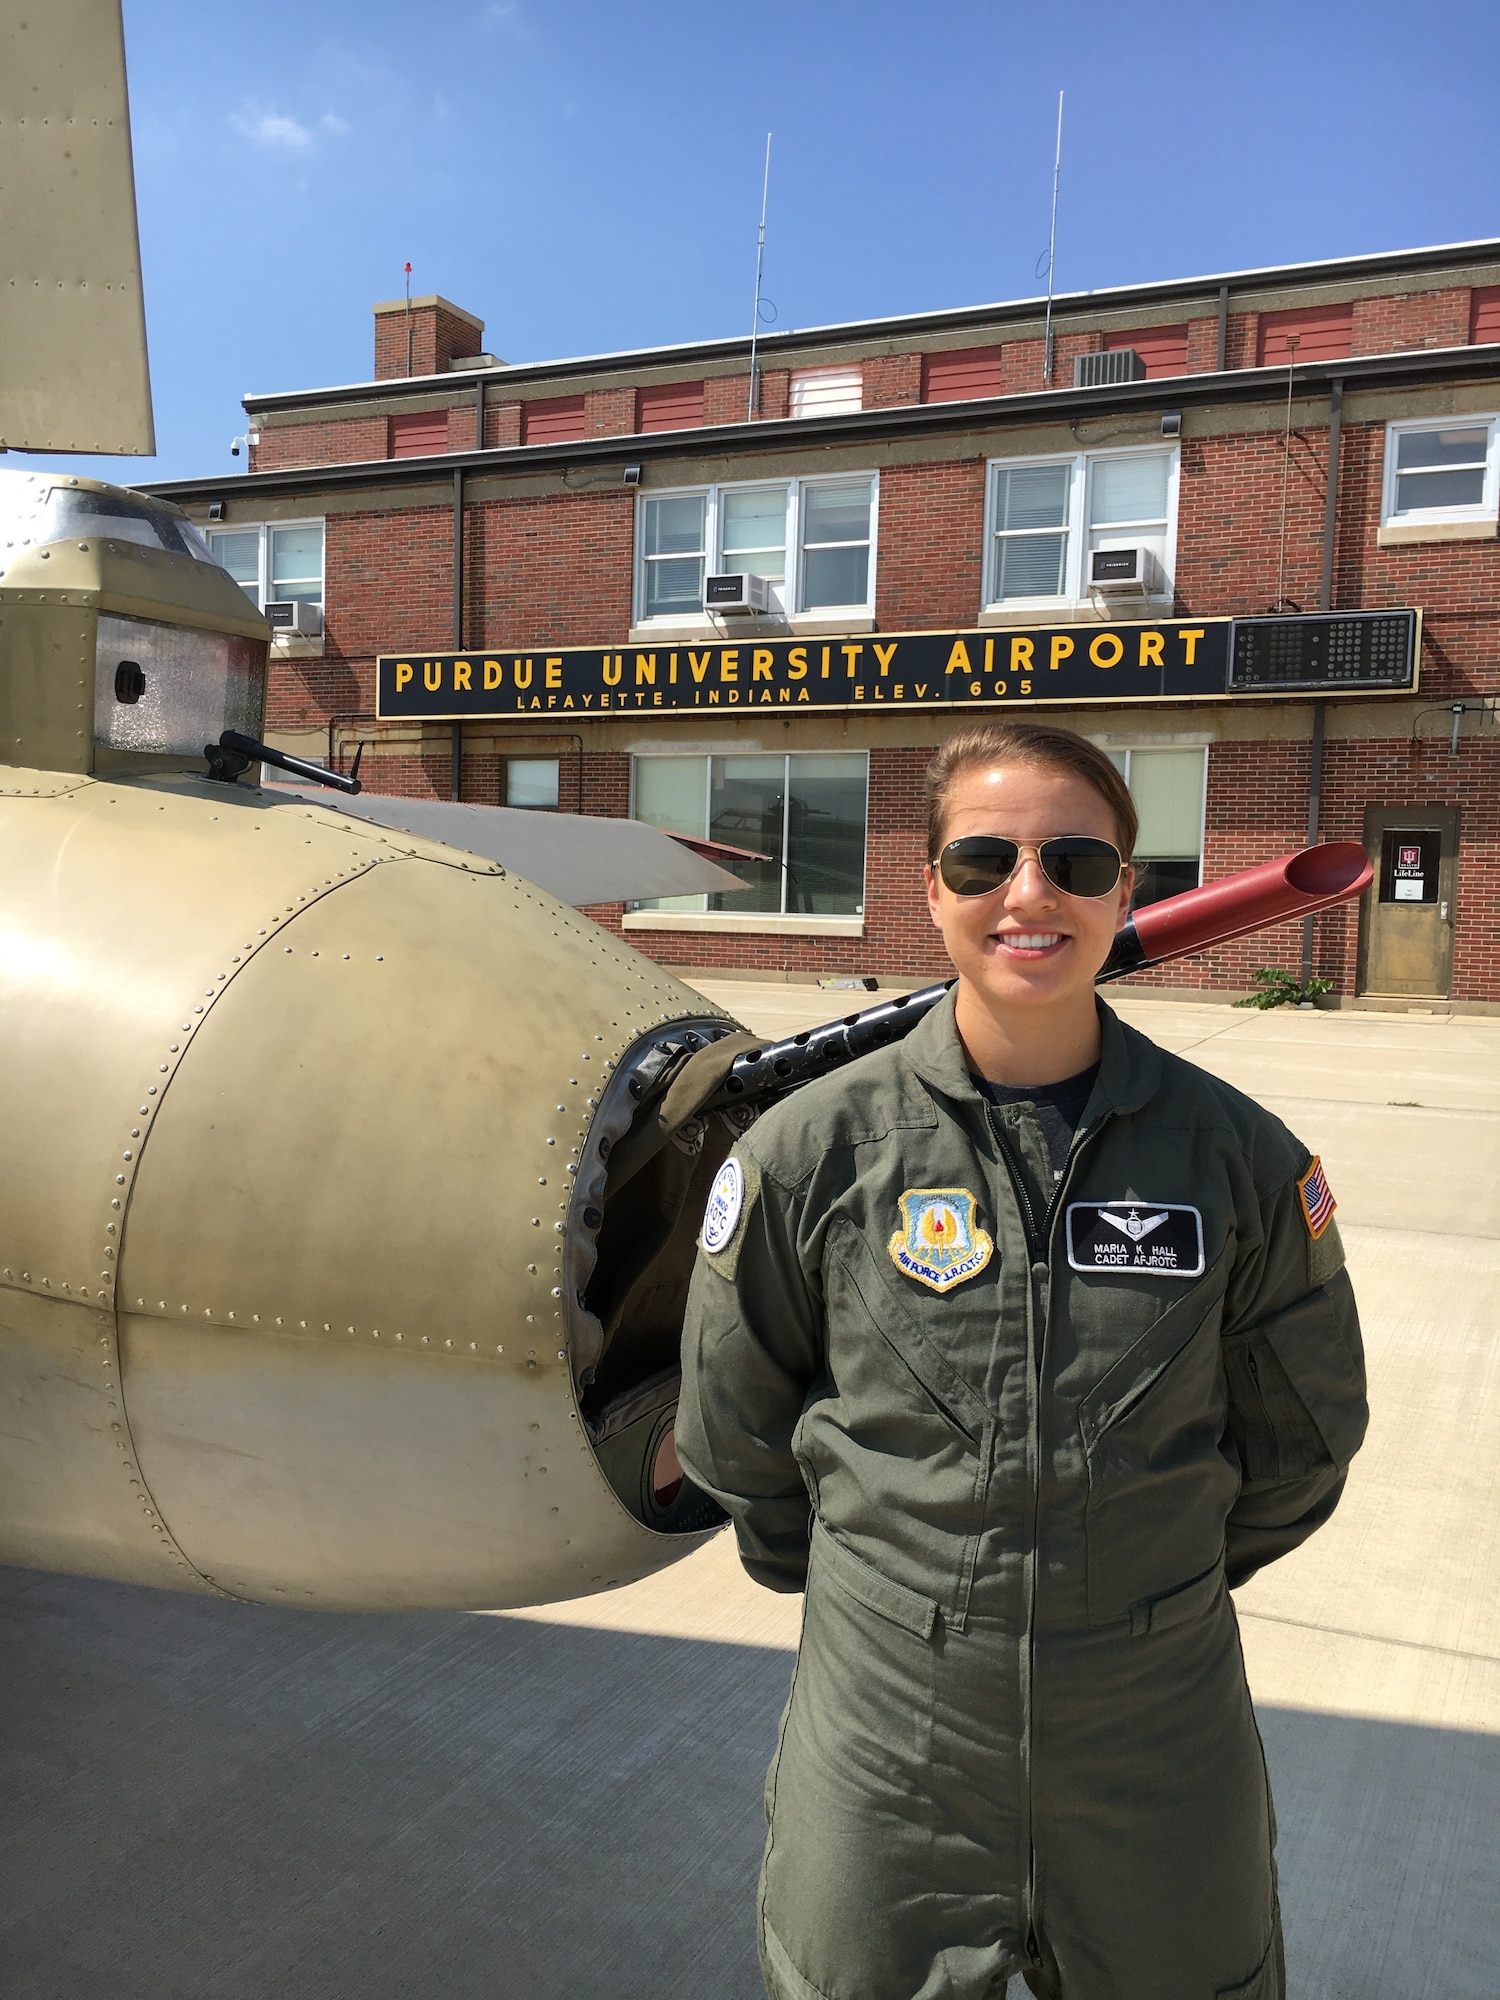 Former Air Force Junior ROTC Cadet Maria Hall, TX-20063, stands in front of a vintage aircraft at the Purdue University Airport as part of the college’s 2018 Flight Academy class. She currently attends Texas A&M University as a sophomore engineering major and contracted Air Force ROTC cadet at Detachment 805. She said the Flight Academy has allowed her to continue to fly and pursue an instrument rating.